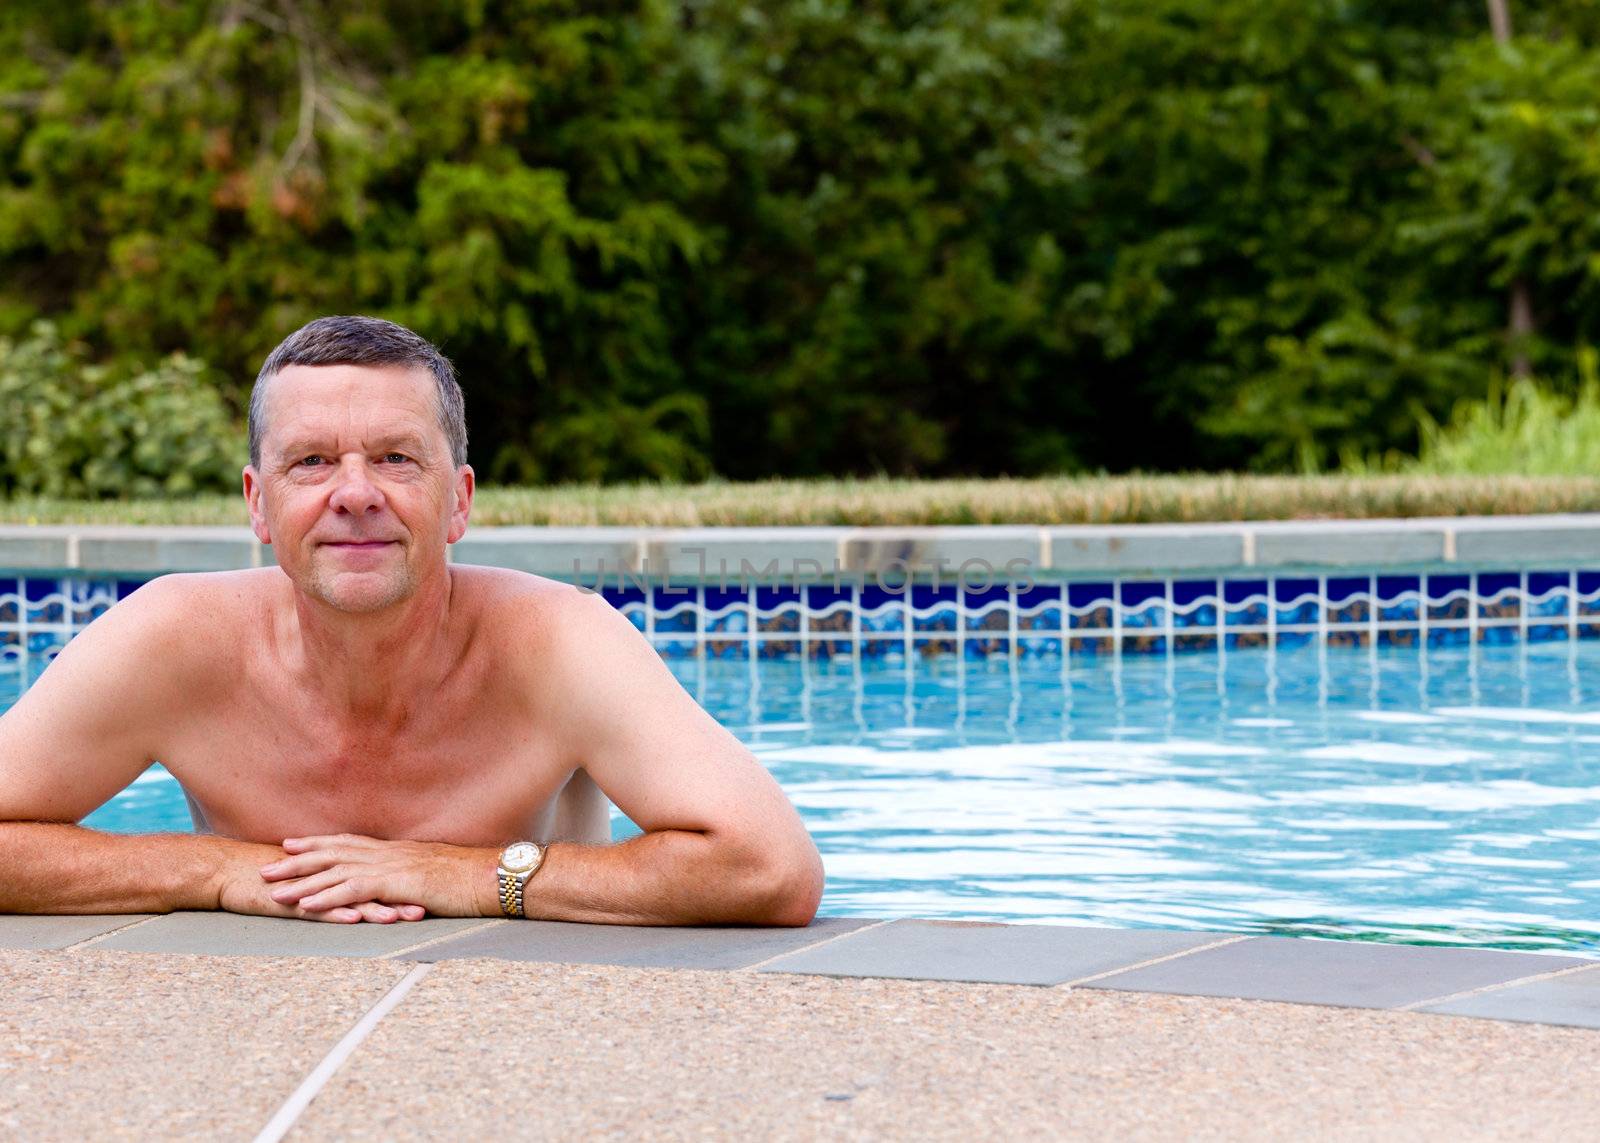 Senior male relaxing by the side of a modern swimming pool in back yard garden and facing the camera with smile